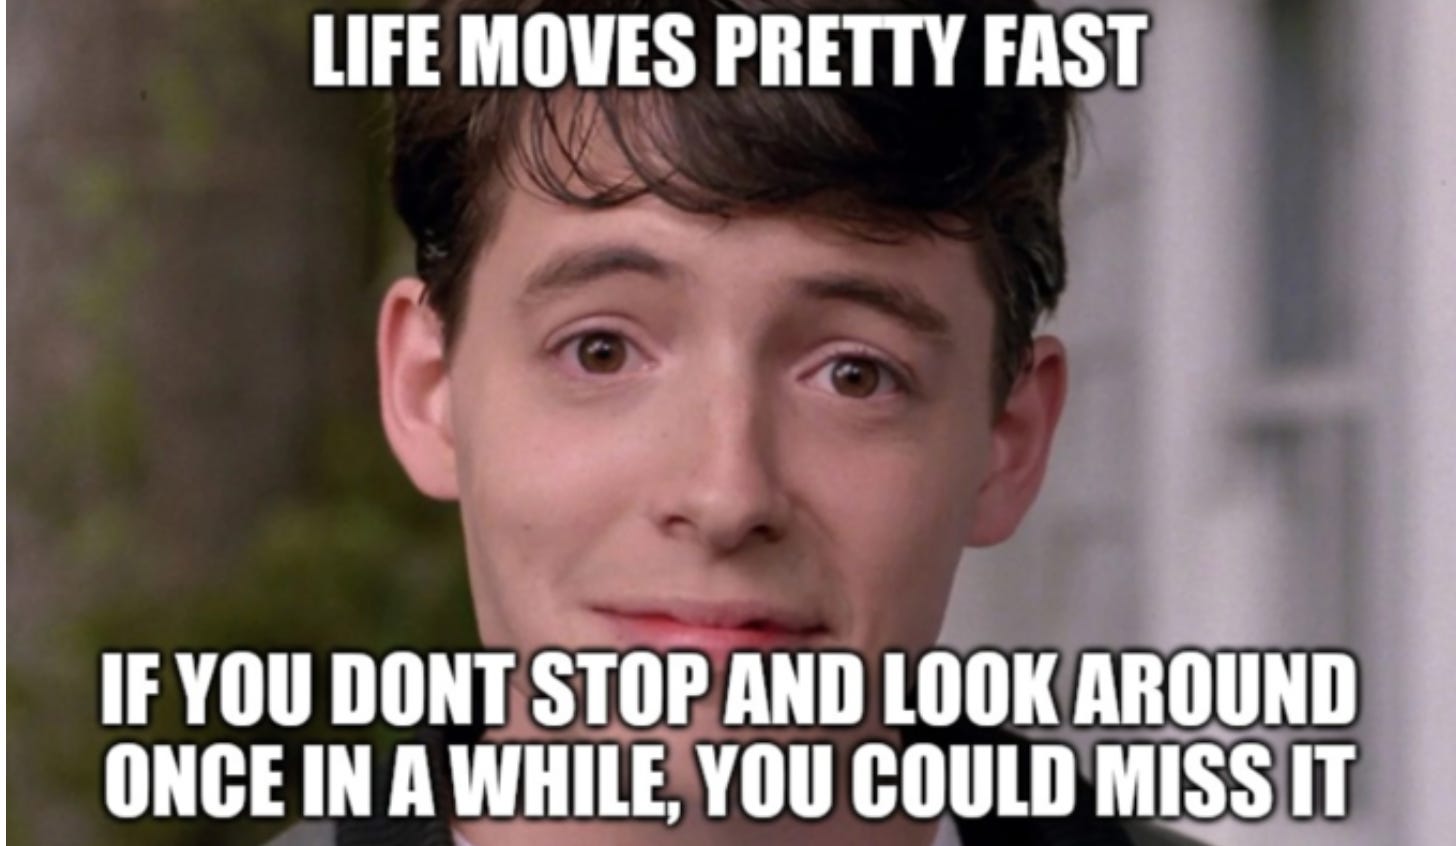 Photo of Ferris Bueller with the quote, "Life moves pretty fast. If you don't stop and look around once in a while, you could miss it."